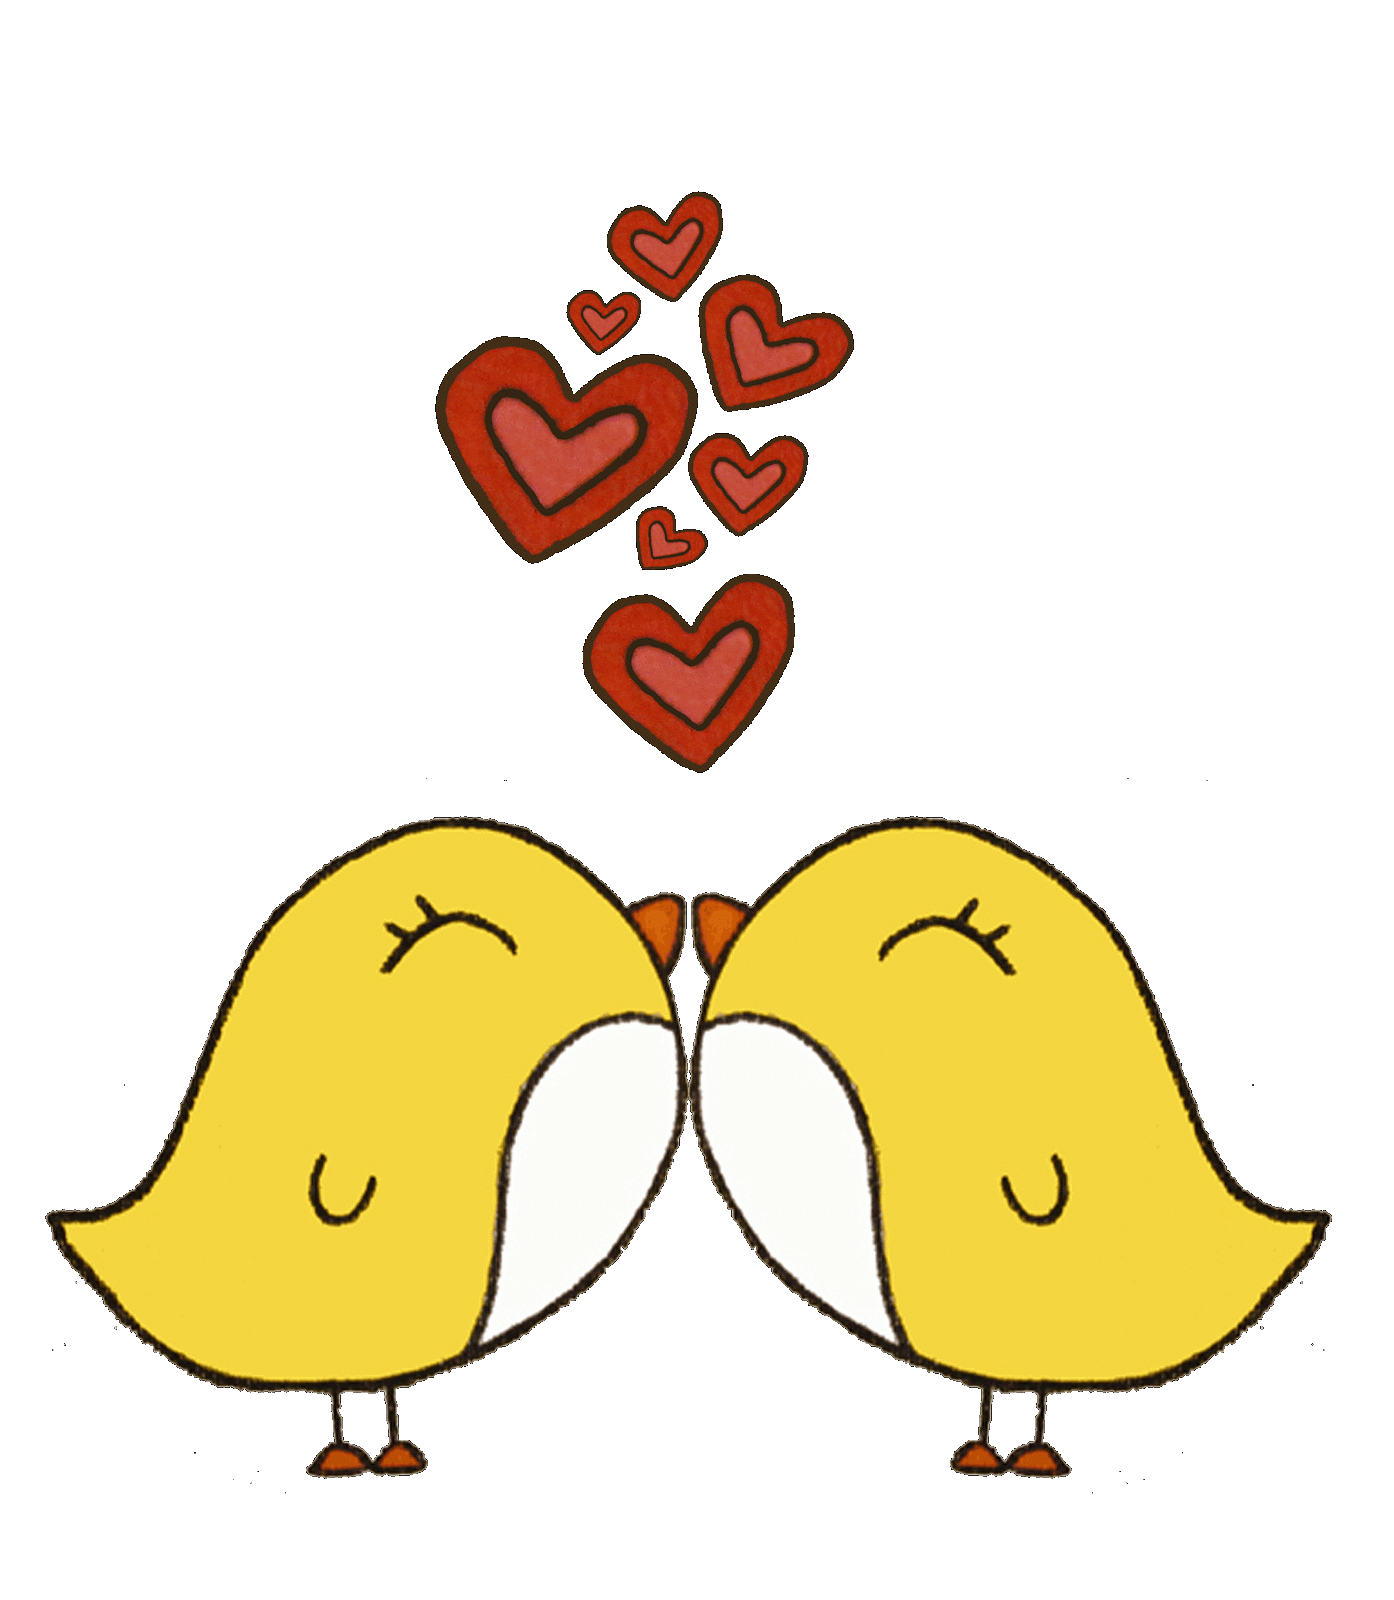 Love Sms Clipart Free Download Clipartfox Clipart Best Clipart Best